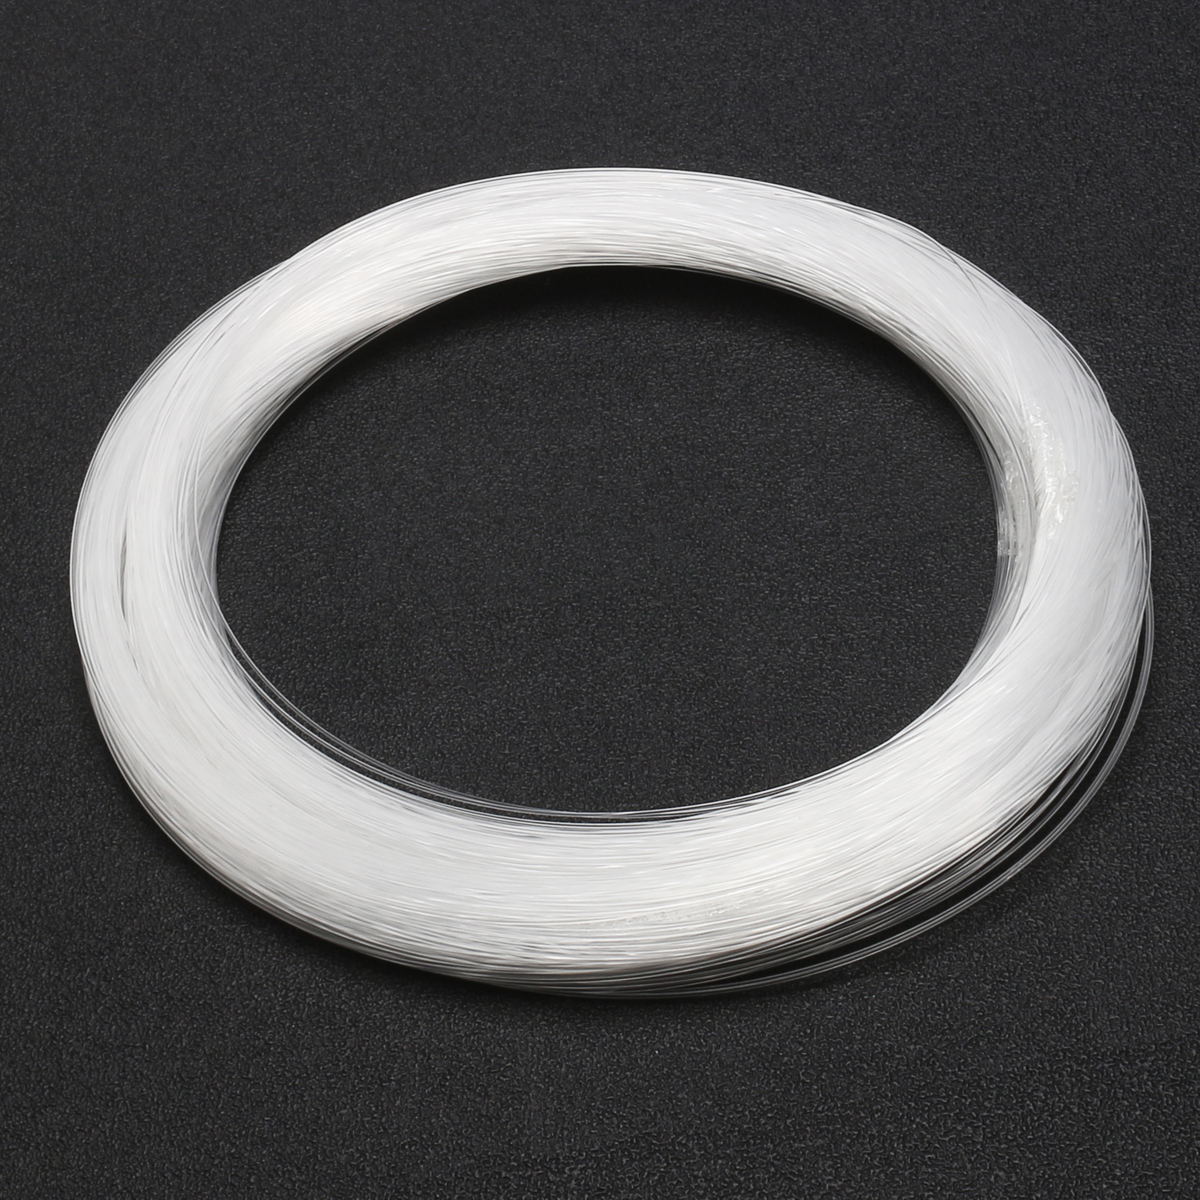 075mm-300mRoll-PMMA-Plastic-End-Glow-Fiber-Optic-Cable-For-Star-Sky-Ceiling-LED-Light-1225461-1